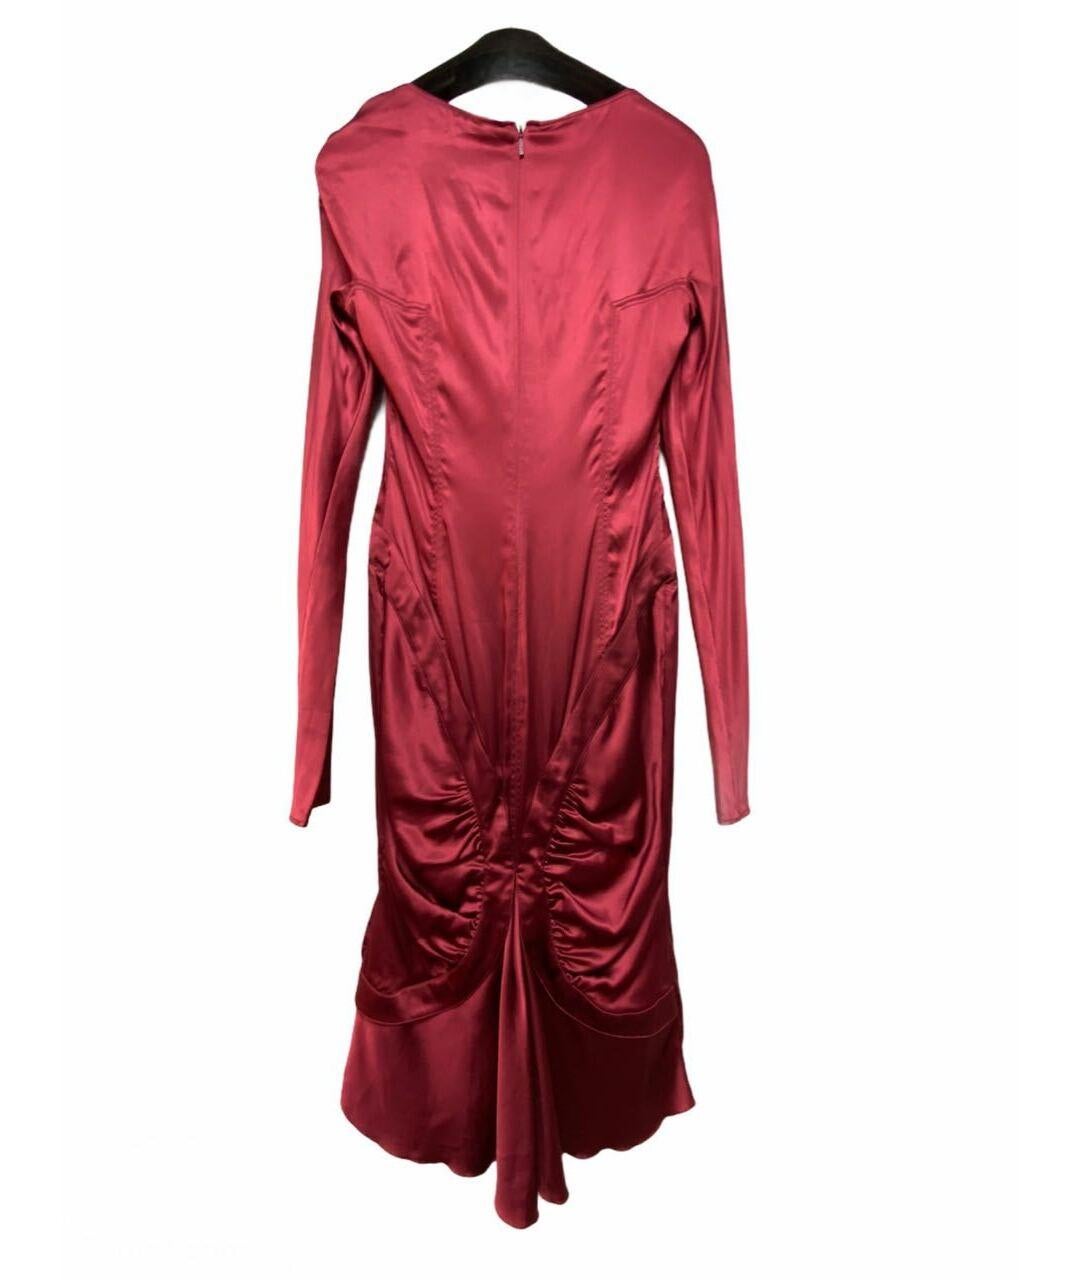 F/W 2003 Vintage Tom Ford for Gucci Red Silk Dress

IT Size 40 - US 4

Silk/Spandex blend

New, with tags

Immaculate condition